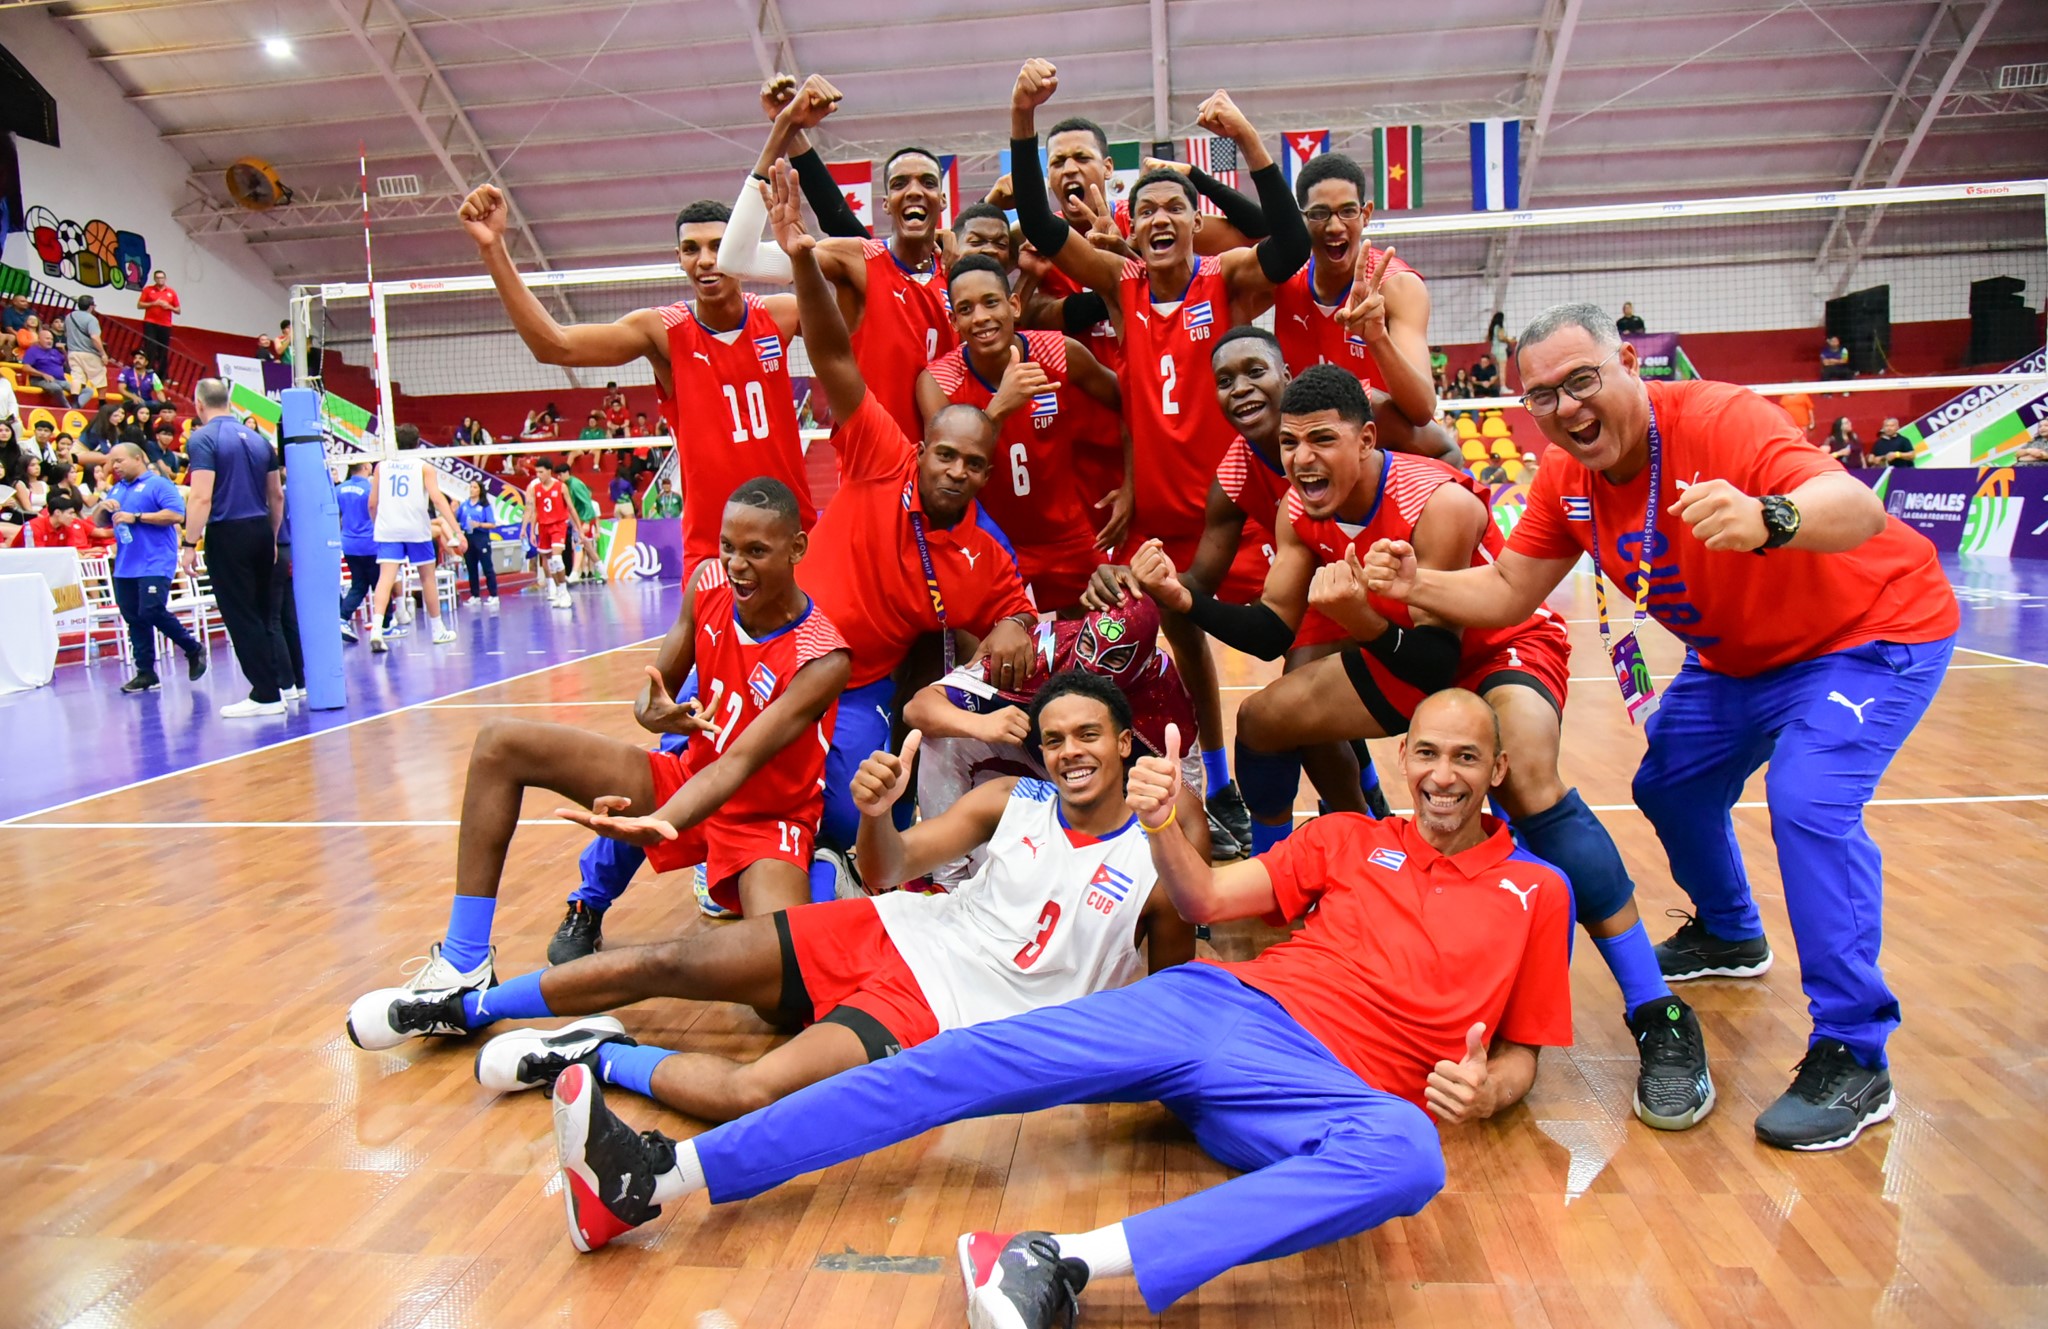 With 30 points, Martínez Carries Cuba to Win the U21 NORCECA Bronze Medal